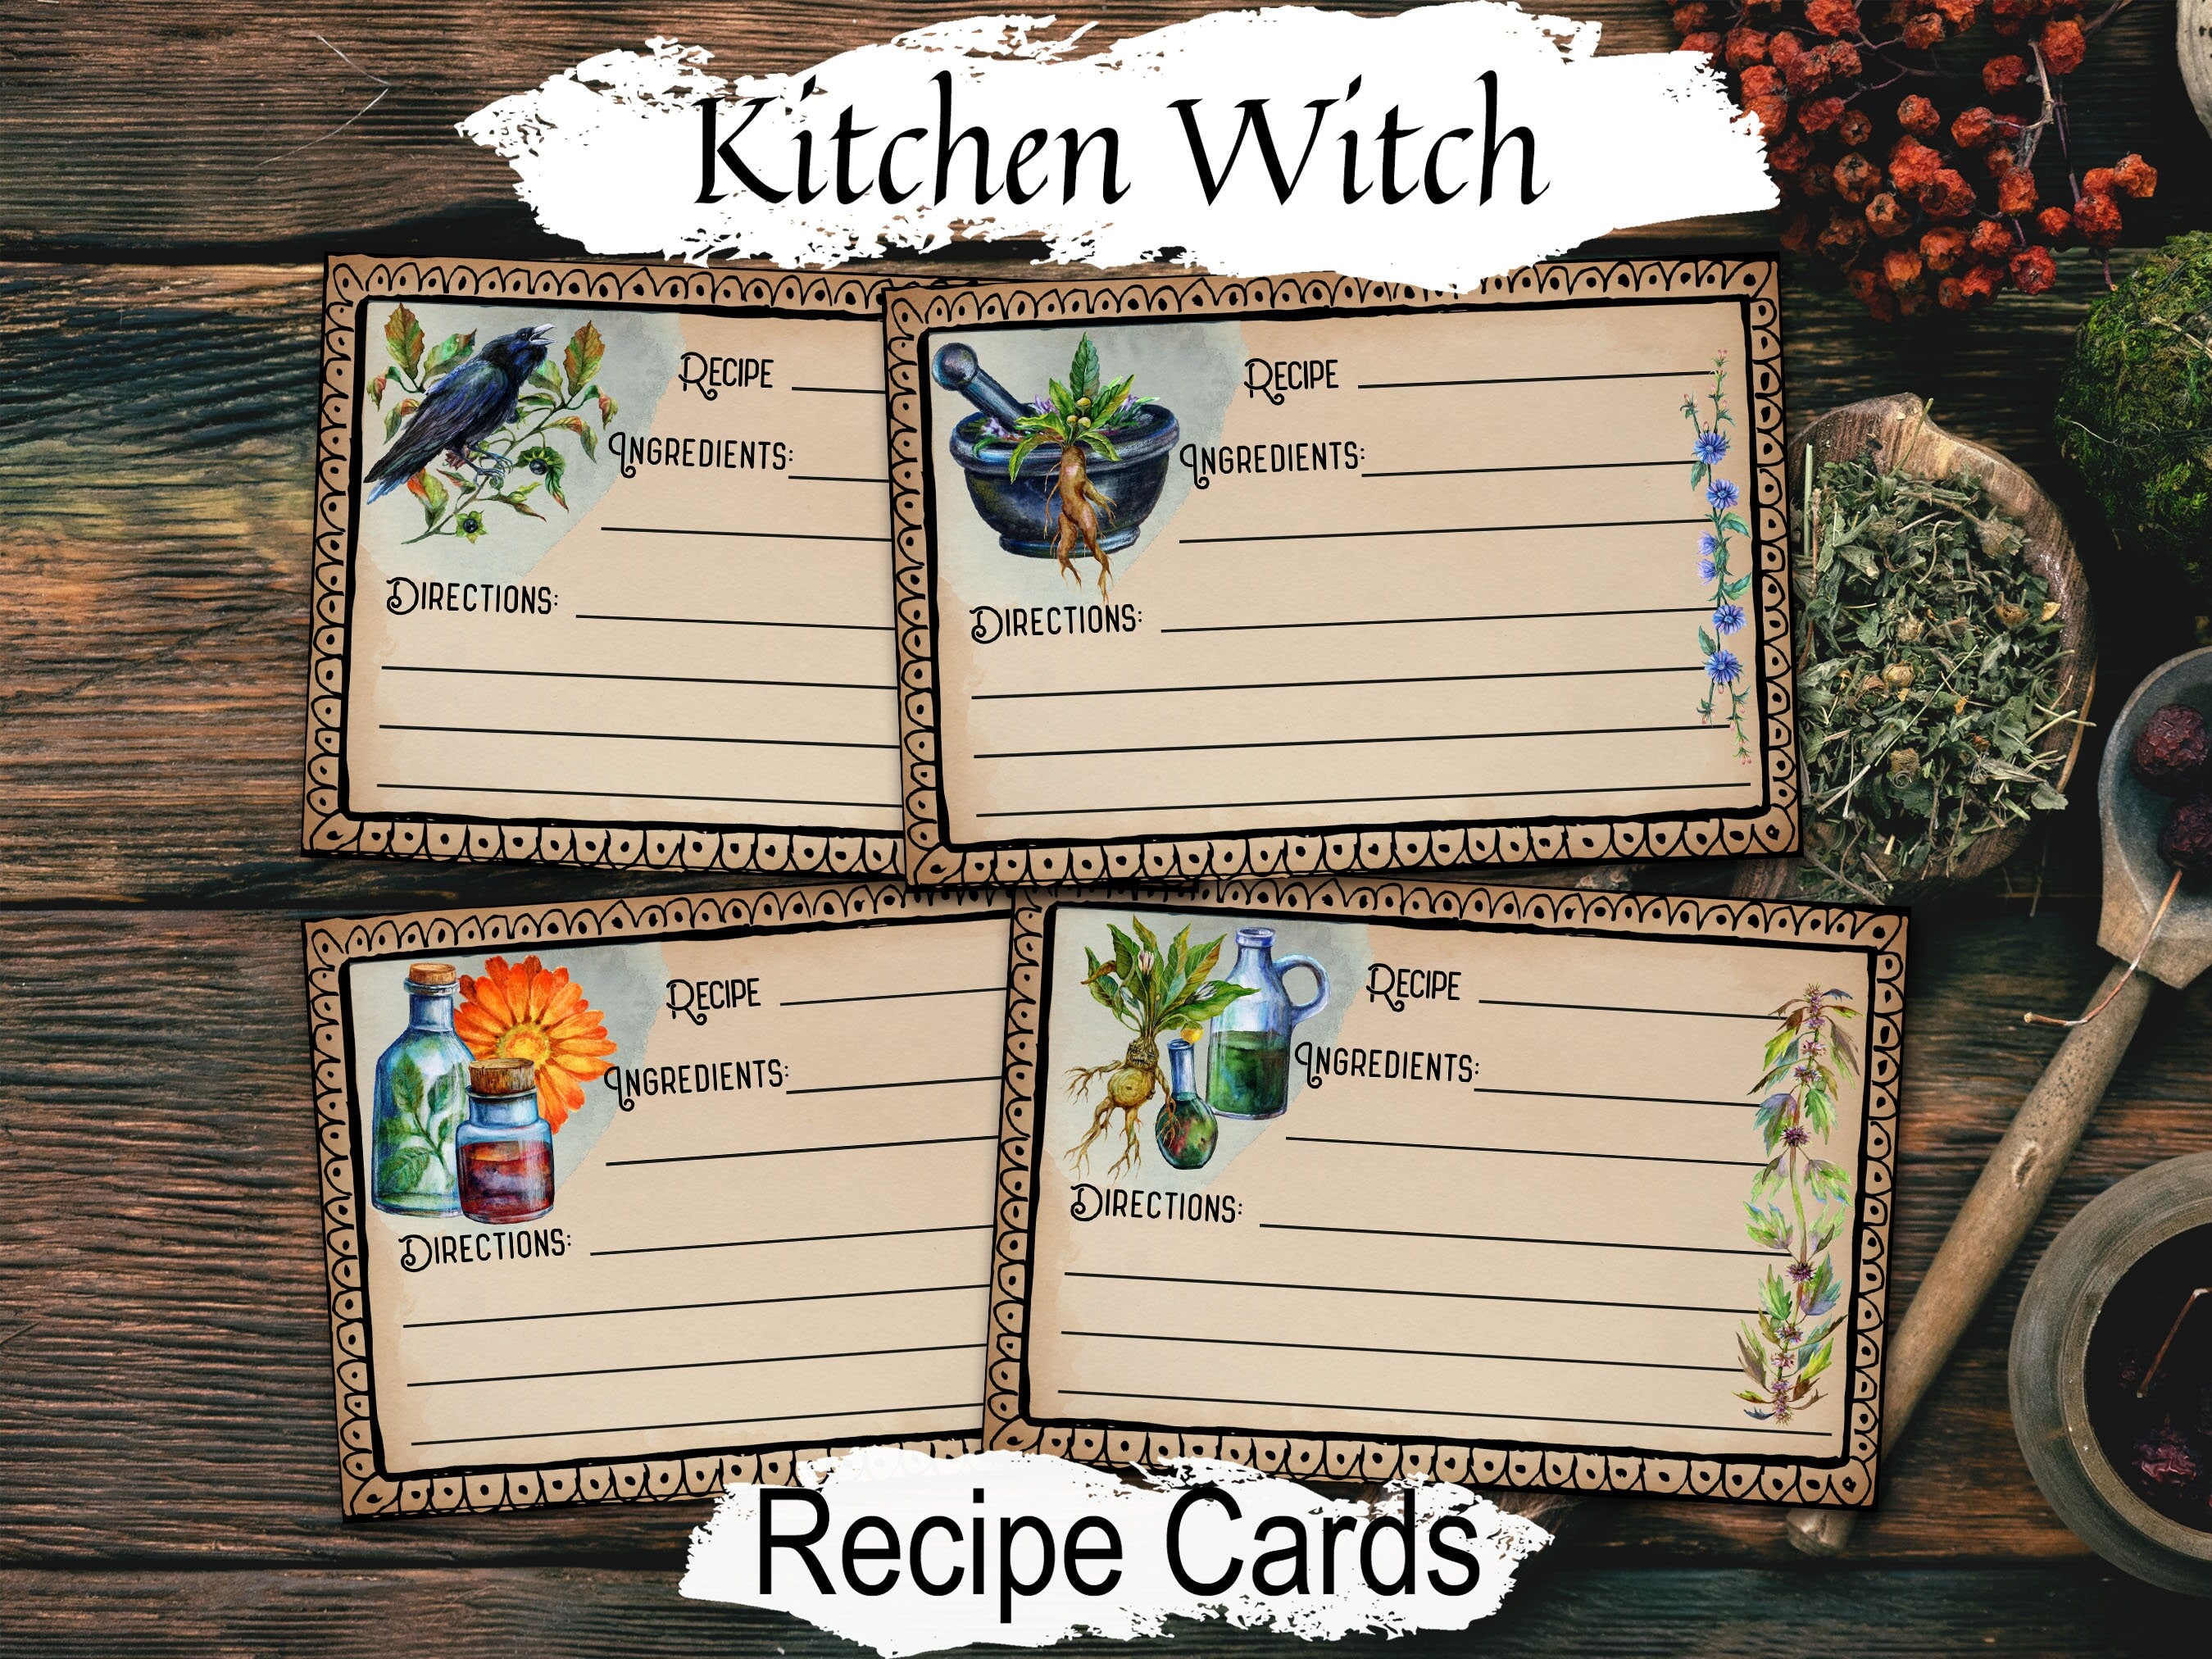 KITCHEN WITCH Recipe Cards, Record your Witchy recipes and spells, Printable Journal Cards for Wicca Witchcraft Potions Spells Oils Incense - Morgana Magick Spell